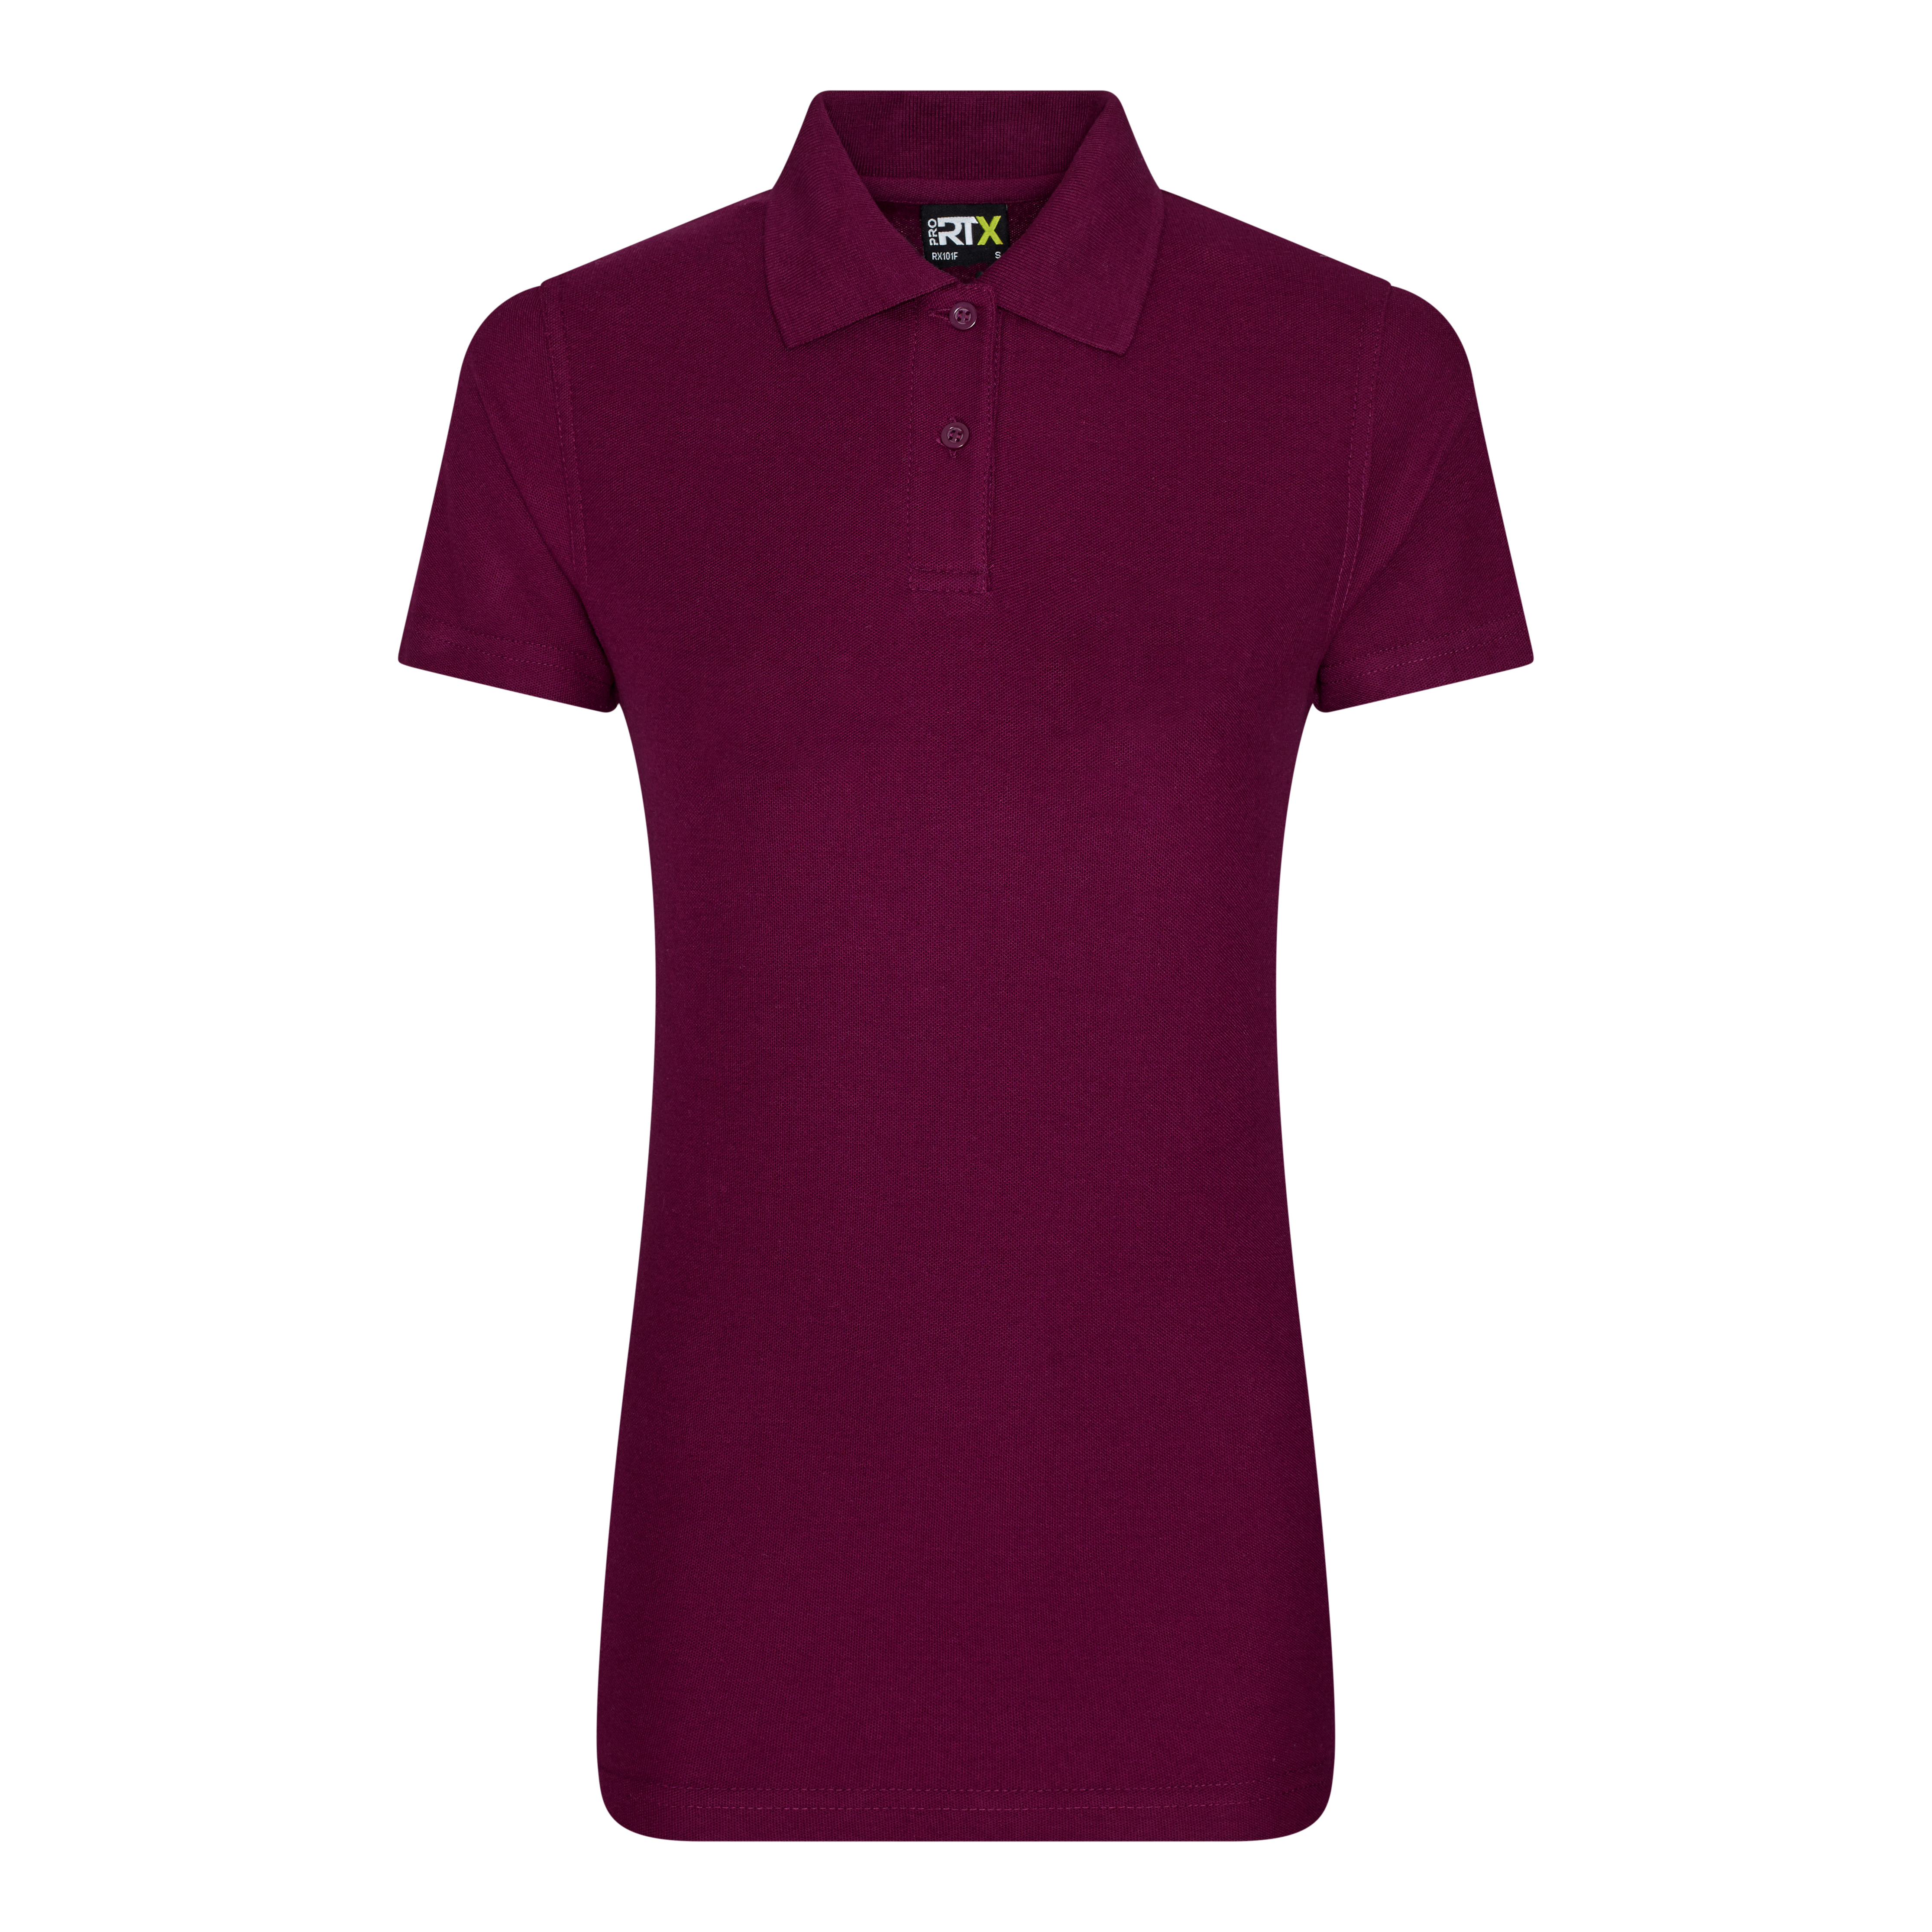 ax-httpswebsystems.s3.amazonaws.comtmp_for_downloadpro-rtx-ladies-pro-polo-burgundy.jpg